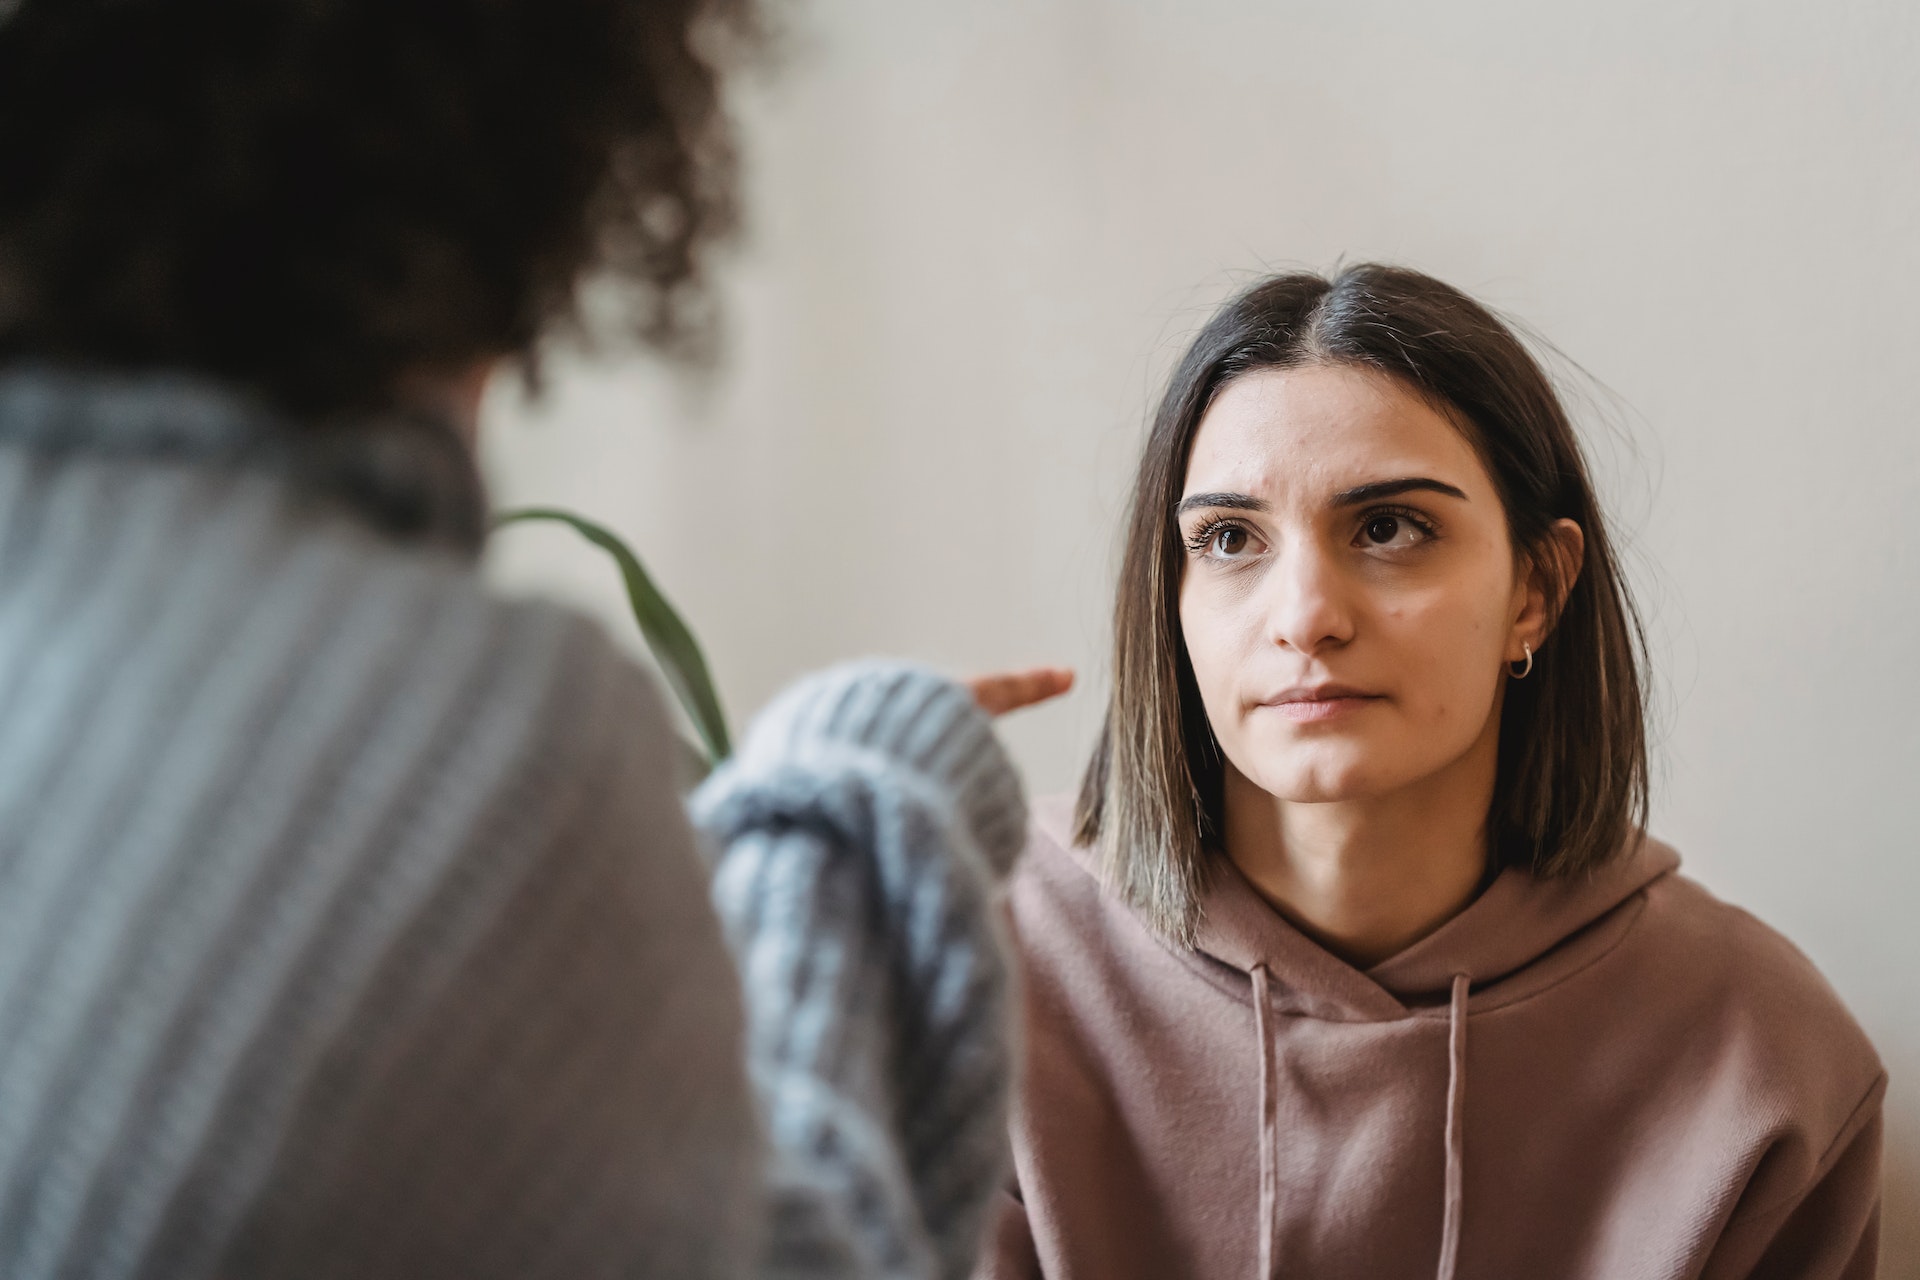 A woman looking at another woman talking to her | Source: Pexels